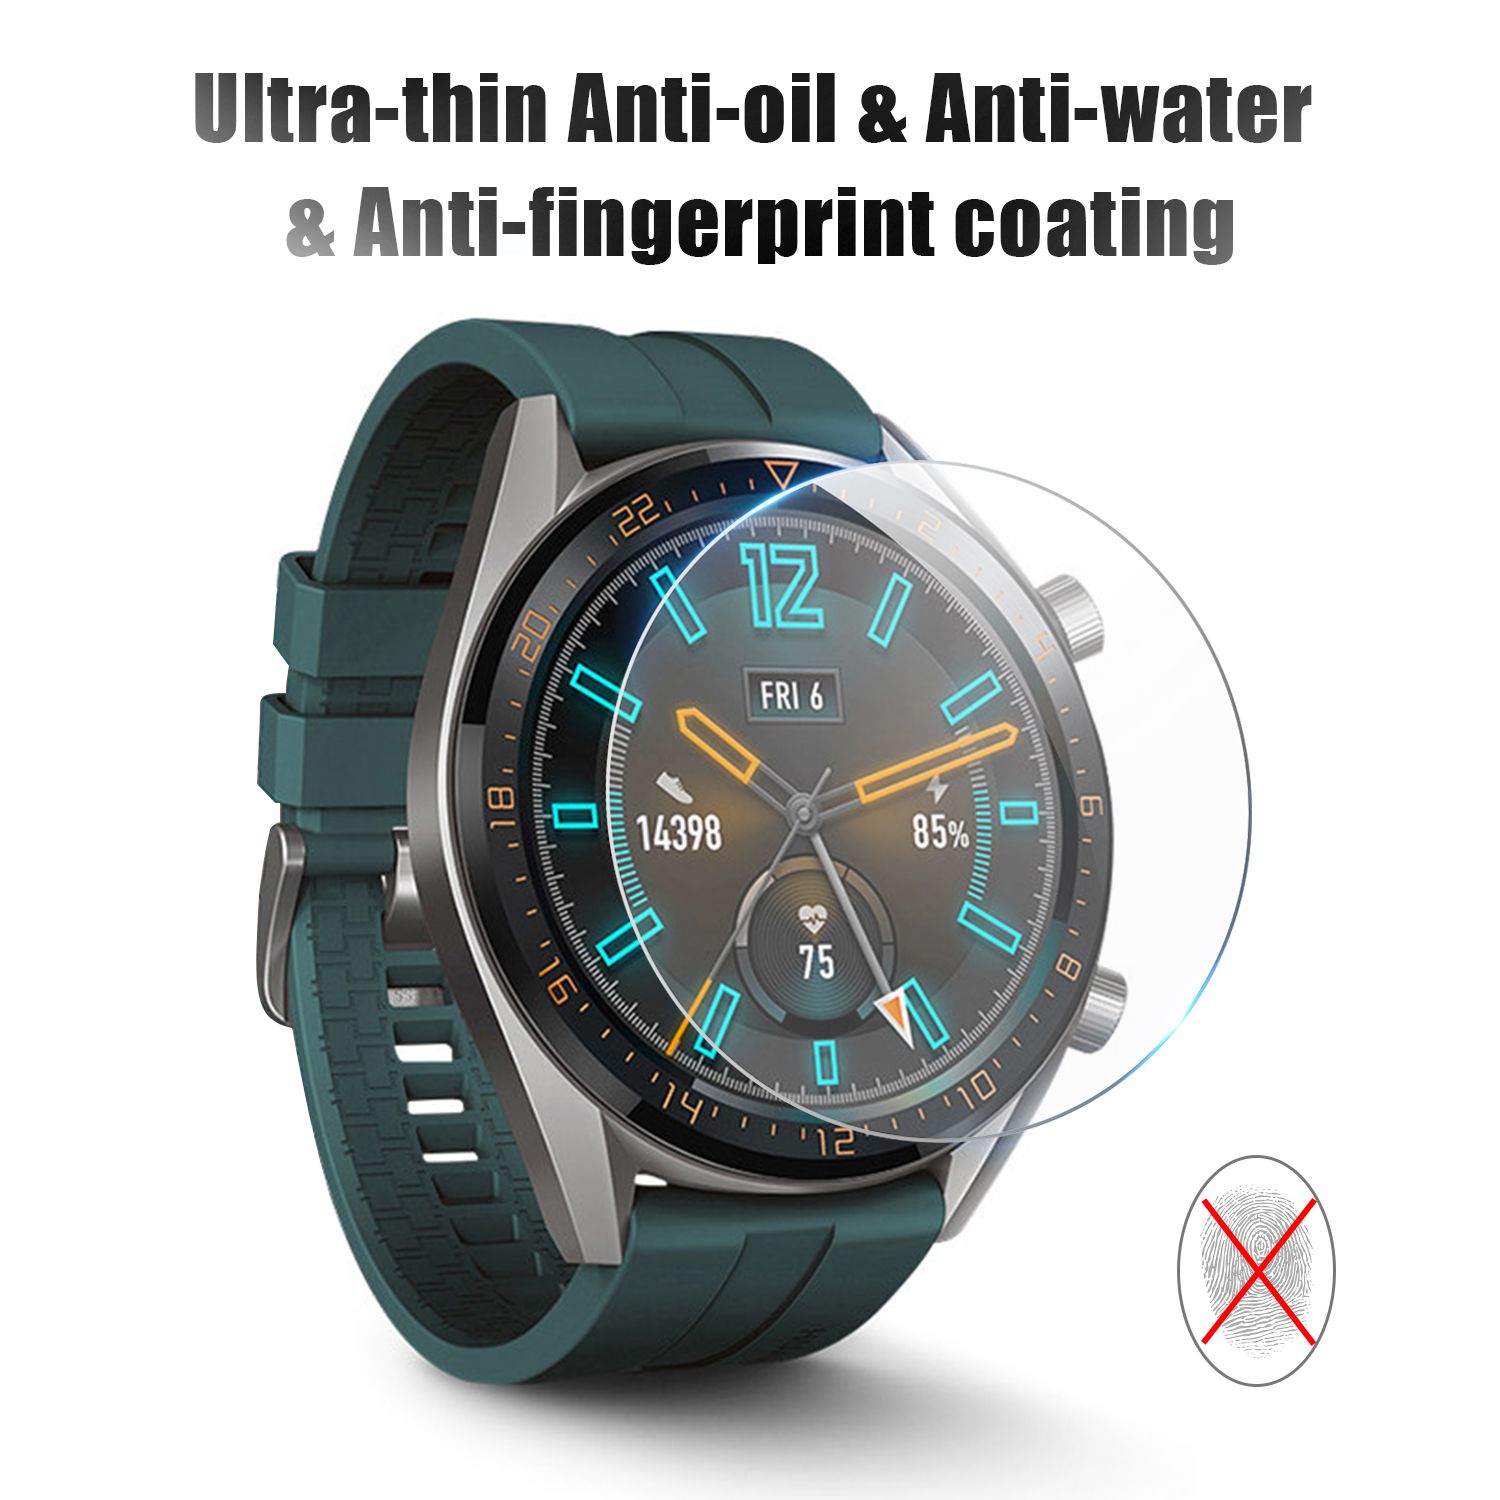 Protective Screen Film For Huawei GT Watch Screen Protector - 1PC